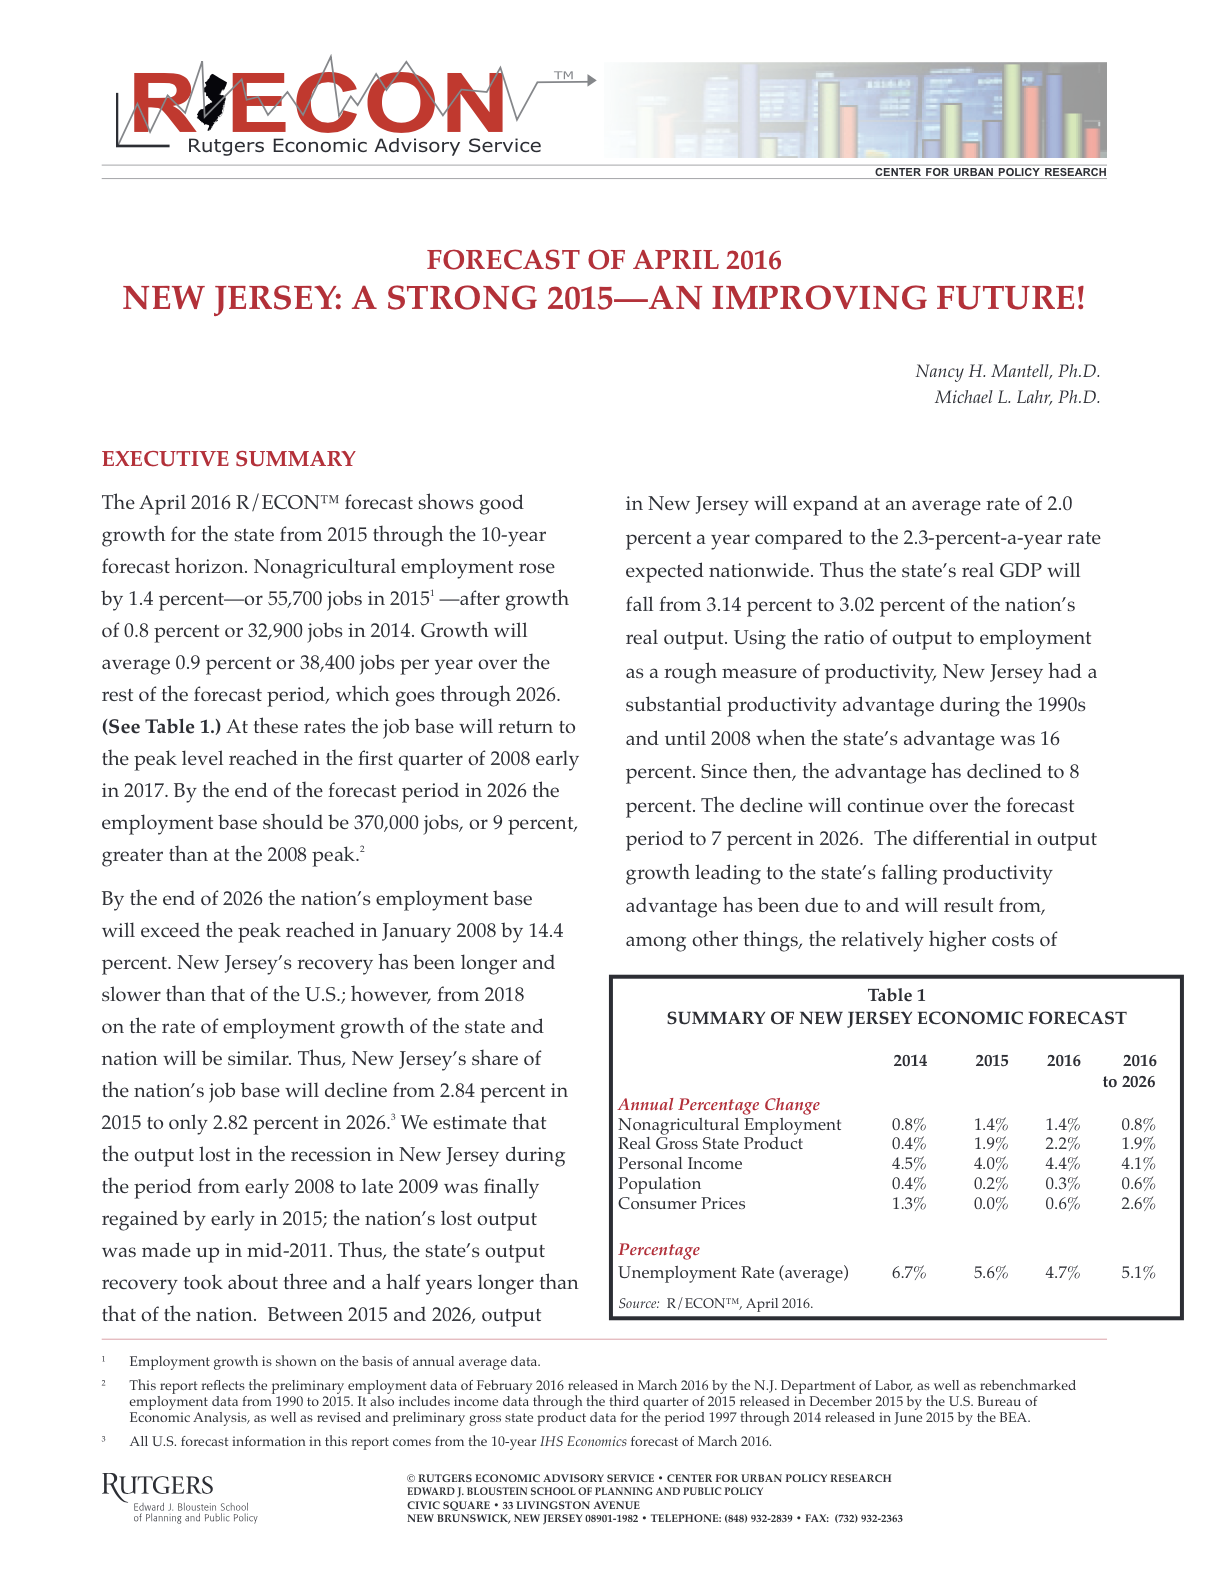 Forecast of April 2016 New Jersey